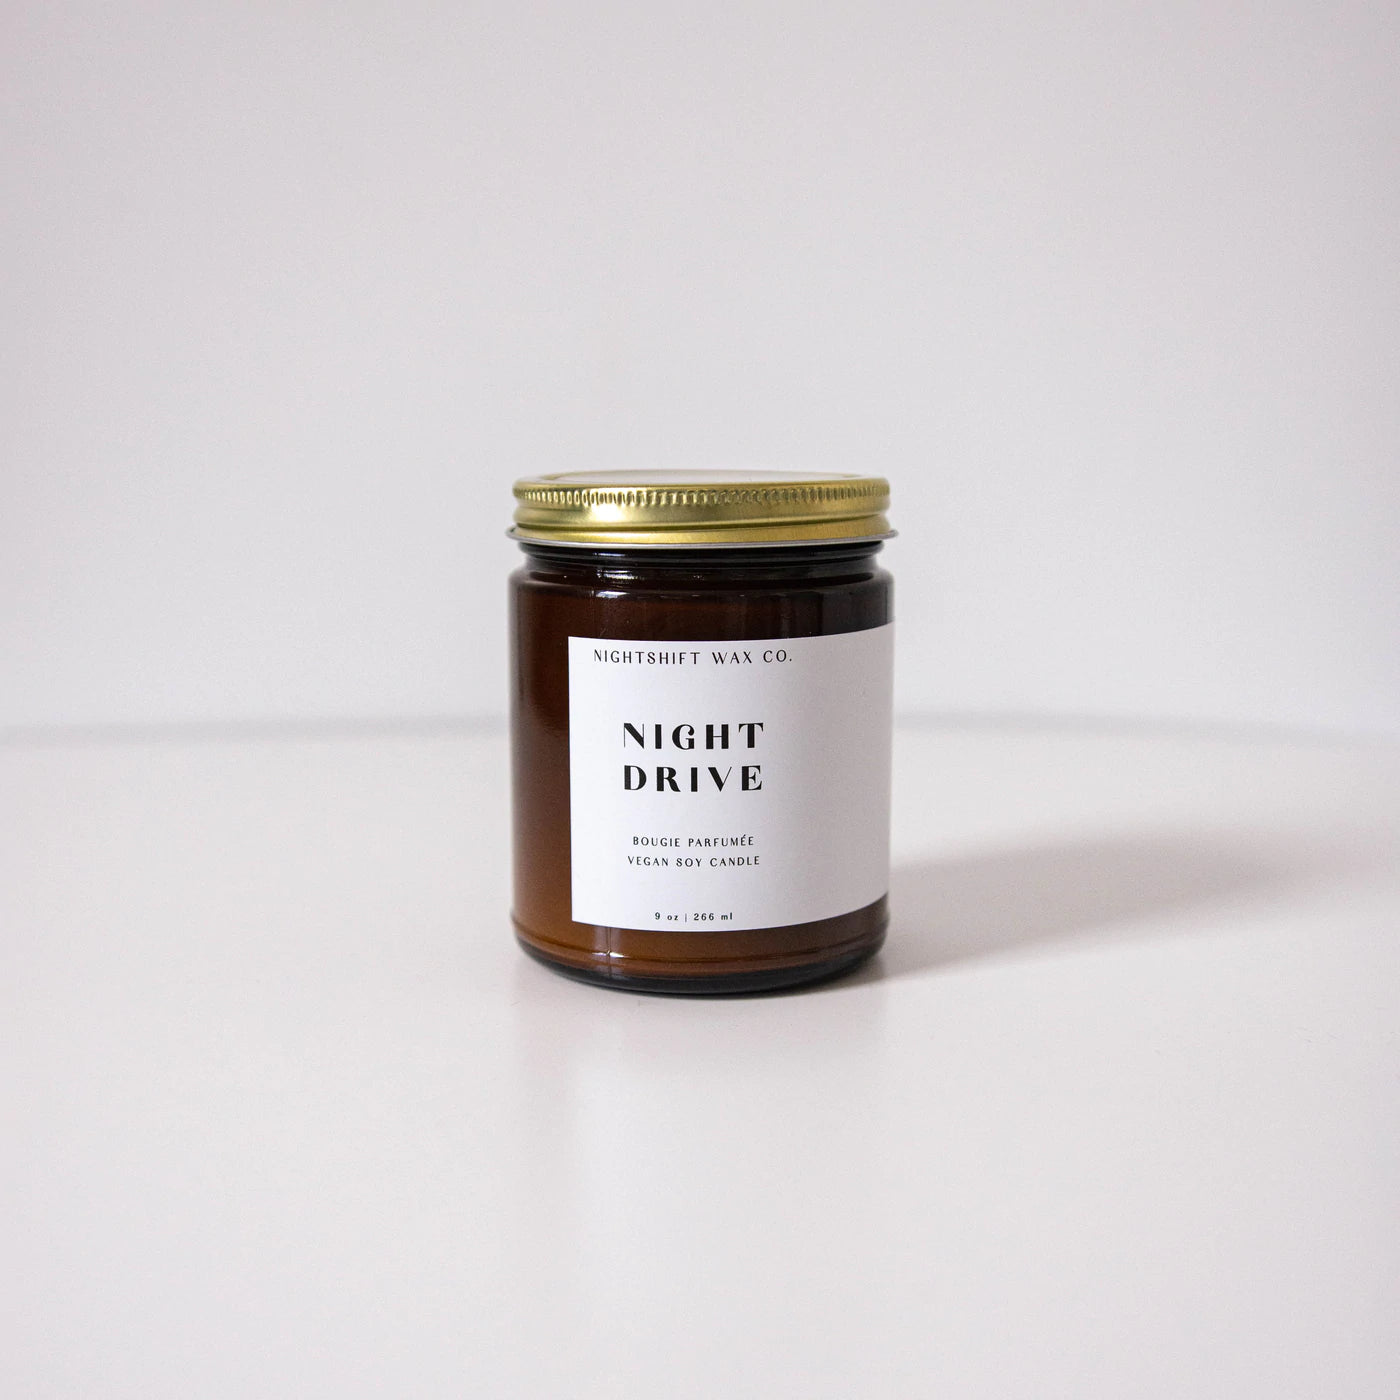 Nightshift Wax Co. Night Drive Soy Candle | Prelude & Dawn | Los Angeles, CA